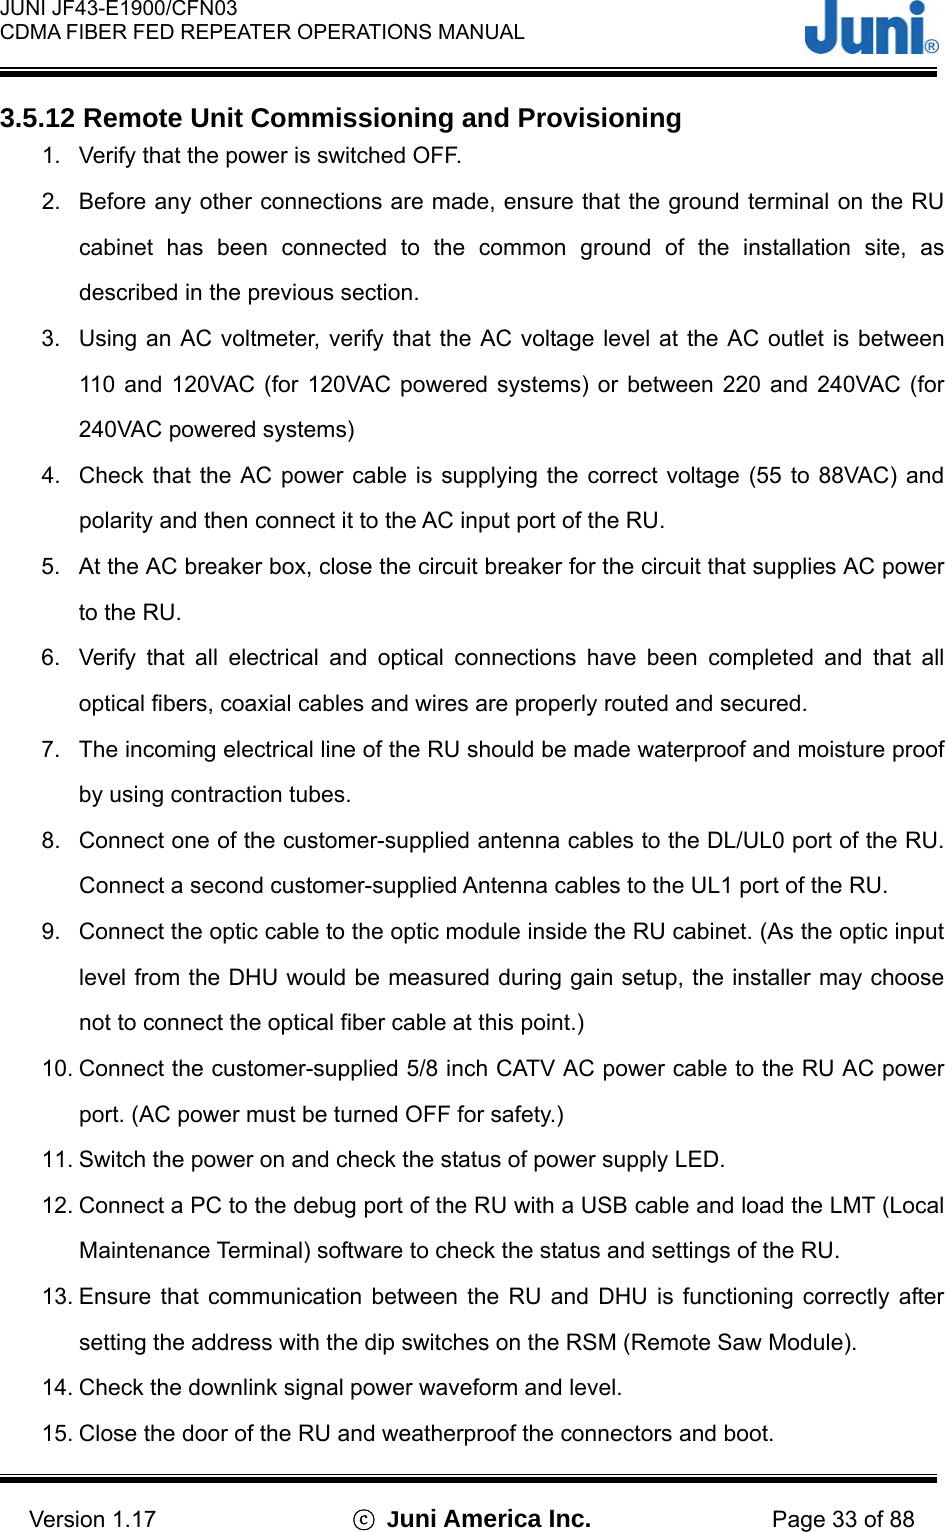  JUNI JF43-E1900/CFN03 CDMA FIBER FED REPEATER OPERATIONS MANUAL                                    Version 1.17  ⓒ Juni America Inc. Page 33 of 88 3.5.12 Remote Unit Commissioning and Provisioning 1.  Verify that the power is switched OFF. 2.  Before any other connections are made, ensure that the ground terminal on the RU cabinet has been connected to the common ground of the installation site, as described in the previous section. 3.  Using an AC voltmeter, verify that the AC voltage level at the AC outlet is between 110 and 120VAC (for 120VAC powered systems) or between 220 and 240VAC (for 240VAC powered systems) 4.  Check that the AC power cable is supplying the correct voltage (55 to 88VAC) and polarity and then connect it to the AC input port of the RU. 5.  At the AC breaker box, close the circuit breaker for the circuit that supplies AC power to the RU. 6.  Verify that all electrical and optical connections have been completed and that all optical fibers, coaxial cables and wires are properly routed and secured. 7.  The incoming electrical line of the RU should be made waterproof and moisture proof by using contraction tubes. 8.  Connect one of the customer-supplied antenna cables to the DL/UL0 port of the RU.   Connect a second customer-supplied Antenna cables to the UL1 port of the RU. 9.  Connect the optic cable to the optic module inside the RU cabinet. (As the optic input level from the DHU would be measured during gain setup, the installer may choose not to connect the optical fiber cable at this point.) 10. Connect the customer-supplied 5/8 inch CATV AC power cable to the RU AC power port. (AC power must be turned OFF for safety.) 11. Switch the power on and check the status of power supply LED. 12. Connect a PC to the debug port of the RU with a USB cable and load the LMT (Local Maintenance Terminal) software to check the status and settings of the RU. 13. Ensure that communication between the RU and DHU is functioning correctly after setting the address with the dip switches on the RSM (Remote Saw Module). 14. Check the downlink signal power waveform and level. 15. Close the door of the RU and weatherproof the connectors and boot. 